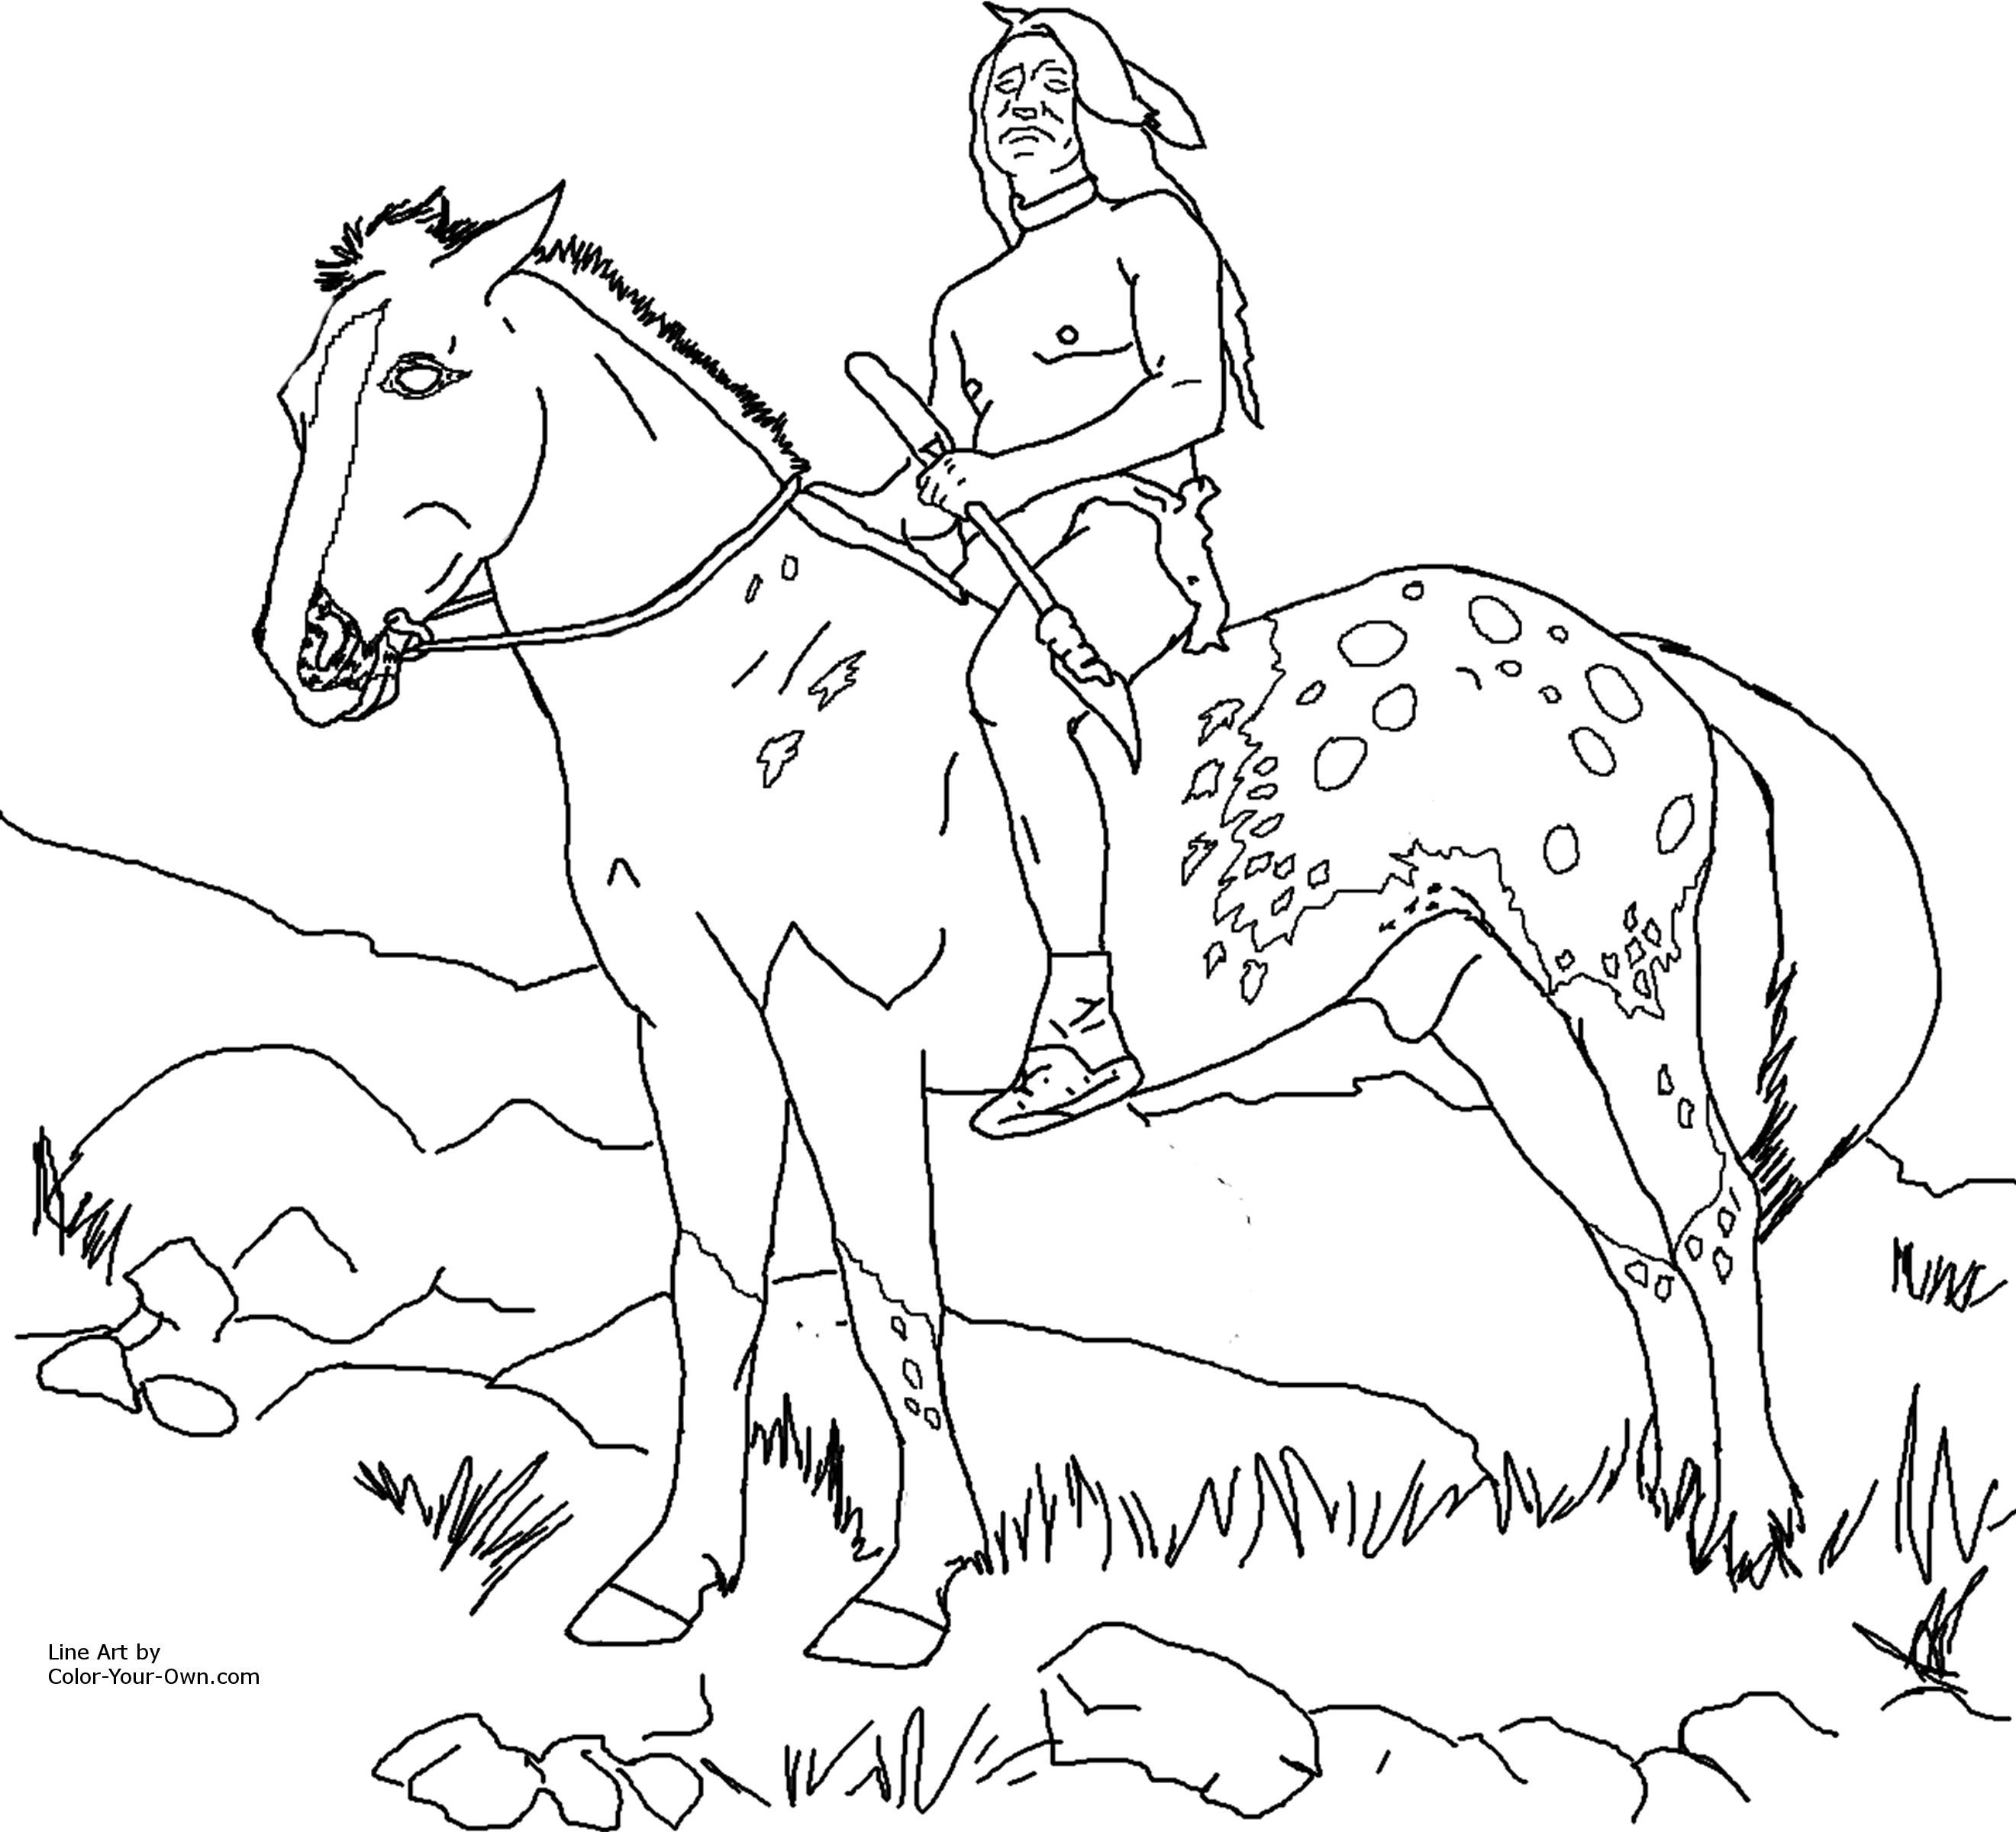 7 Pics of Native American Horse Coloring Pages - Native American ...